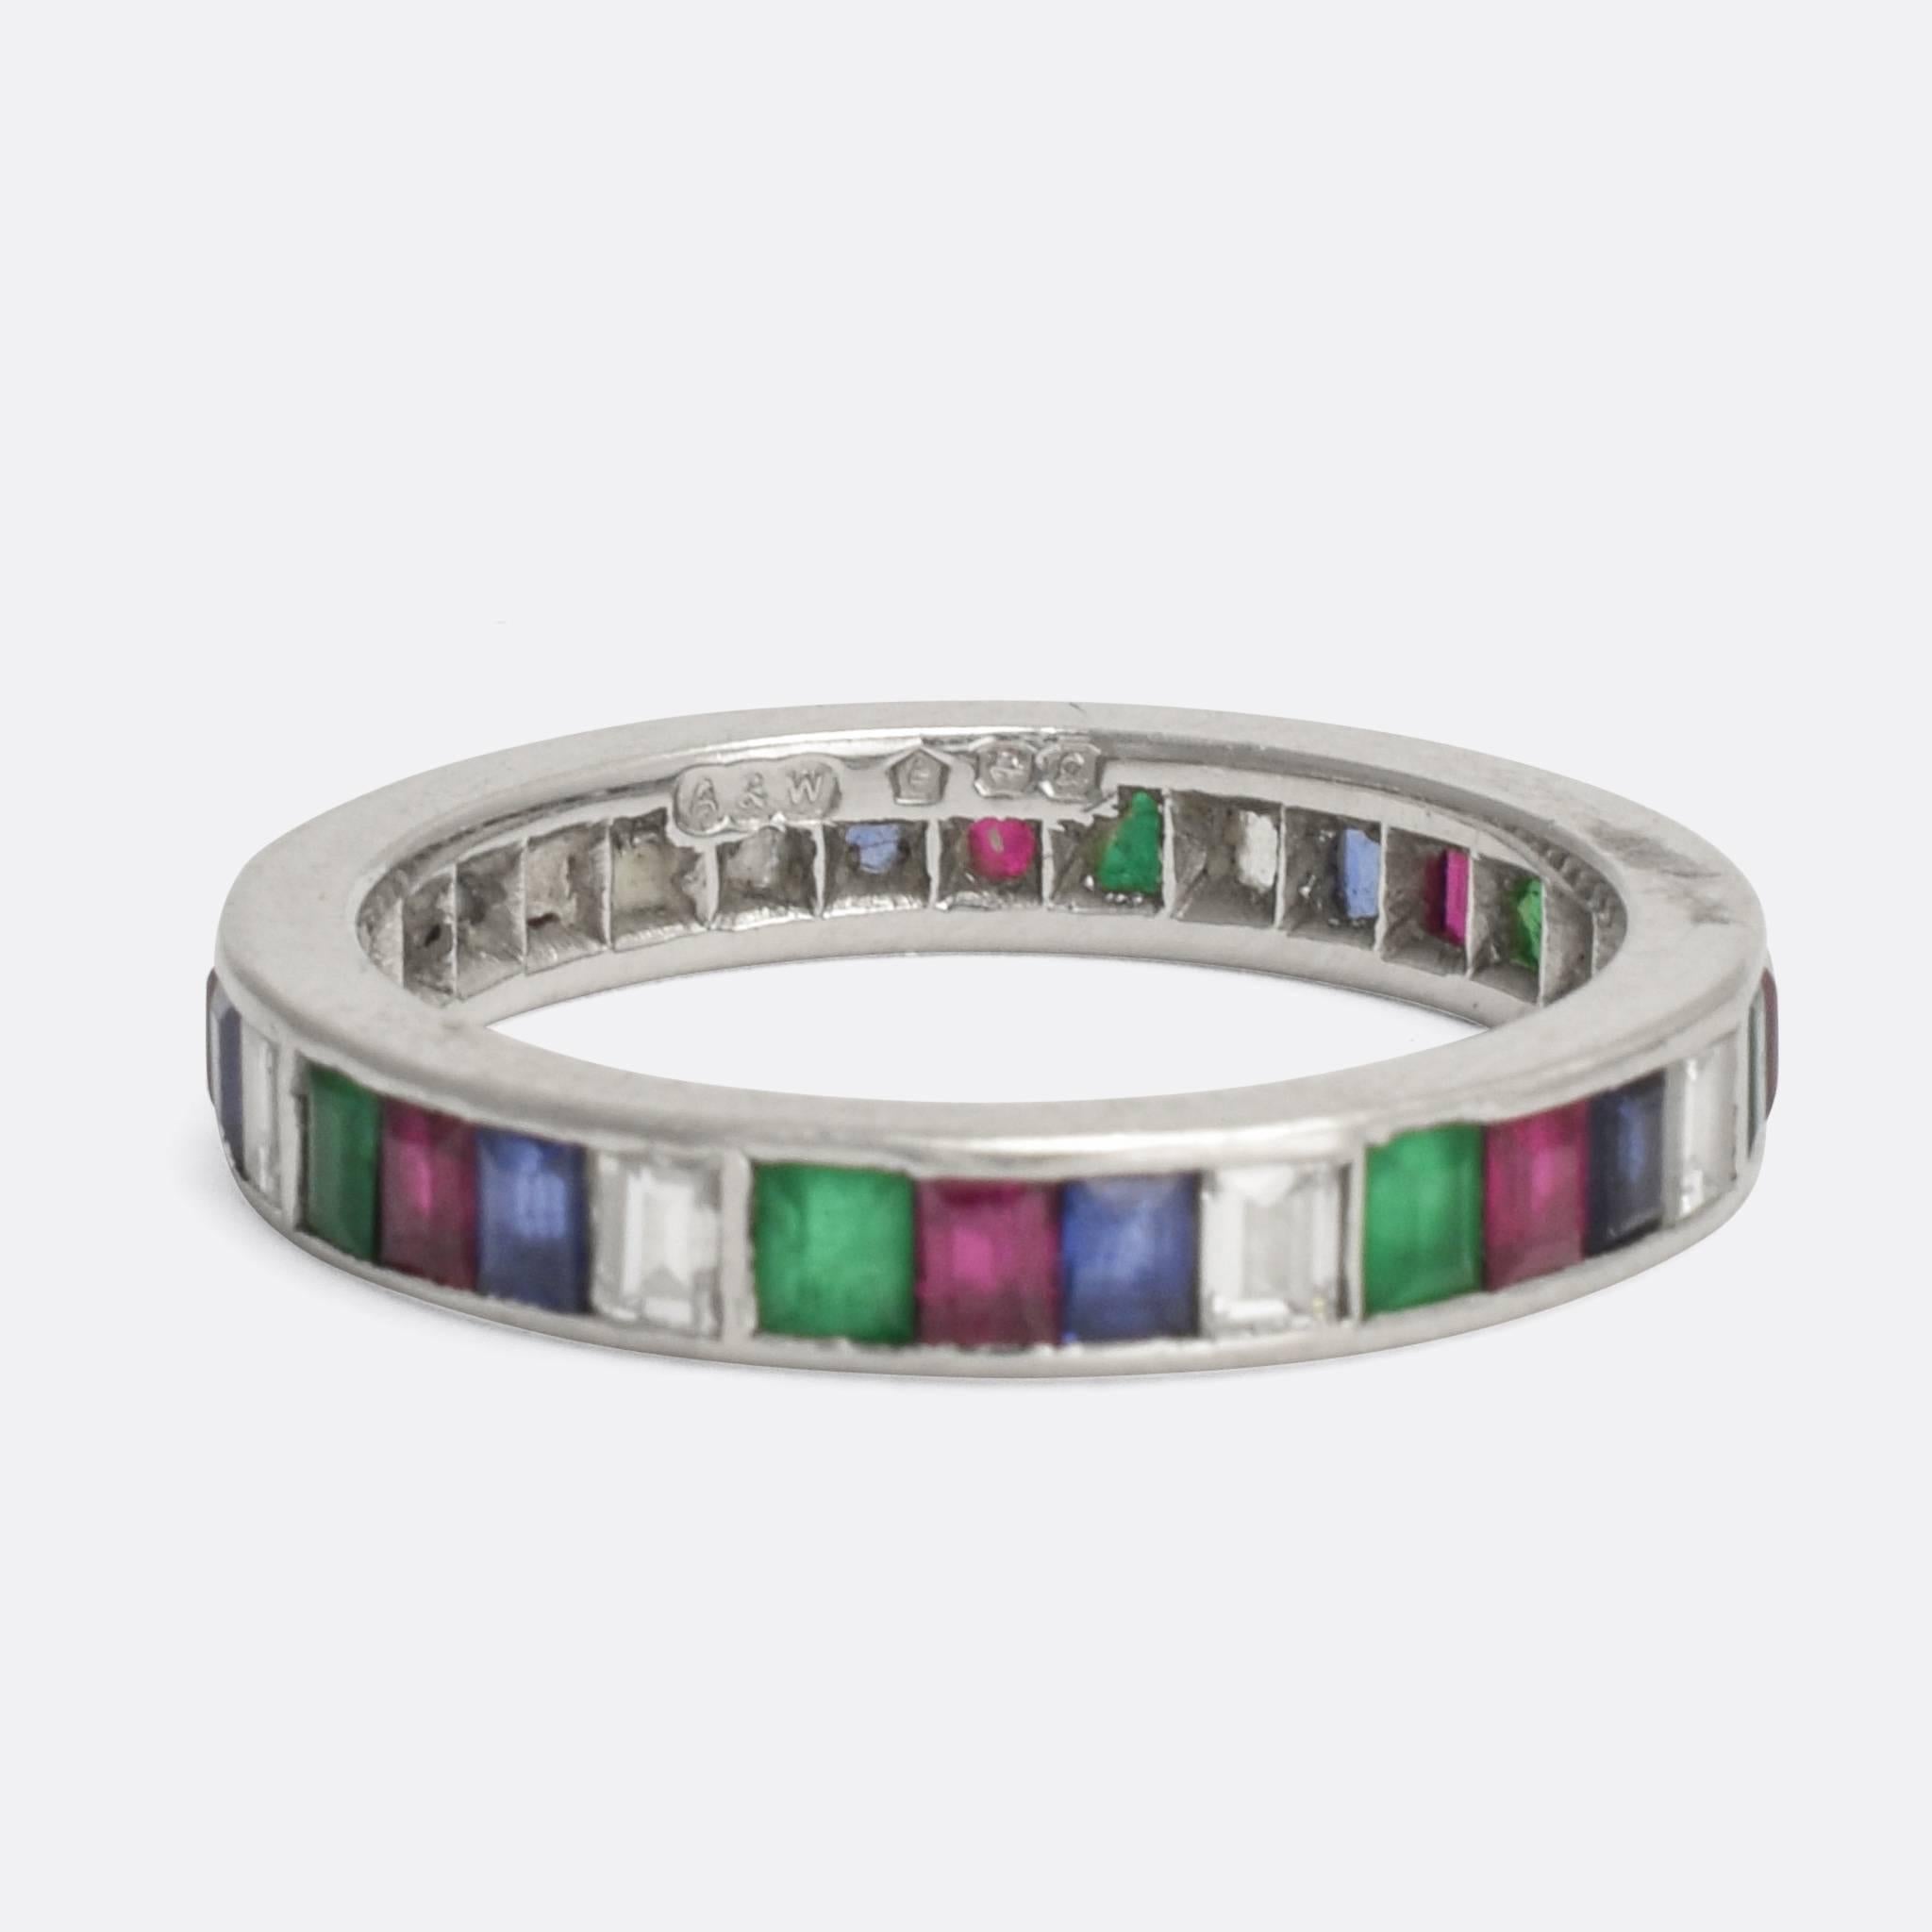 A stunning multi-gem eternity ring dating from the Art Deco period, circa 1930. It's set with White Diamonds, Blue Sapphires, Rubies and Emeralds, and modelled in platinum throughout. A quality piece with the elegant styling and bold colours typical